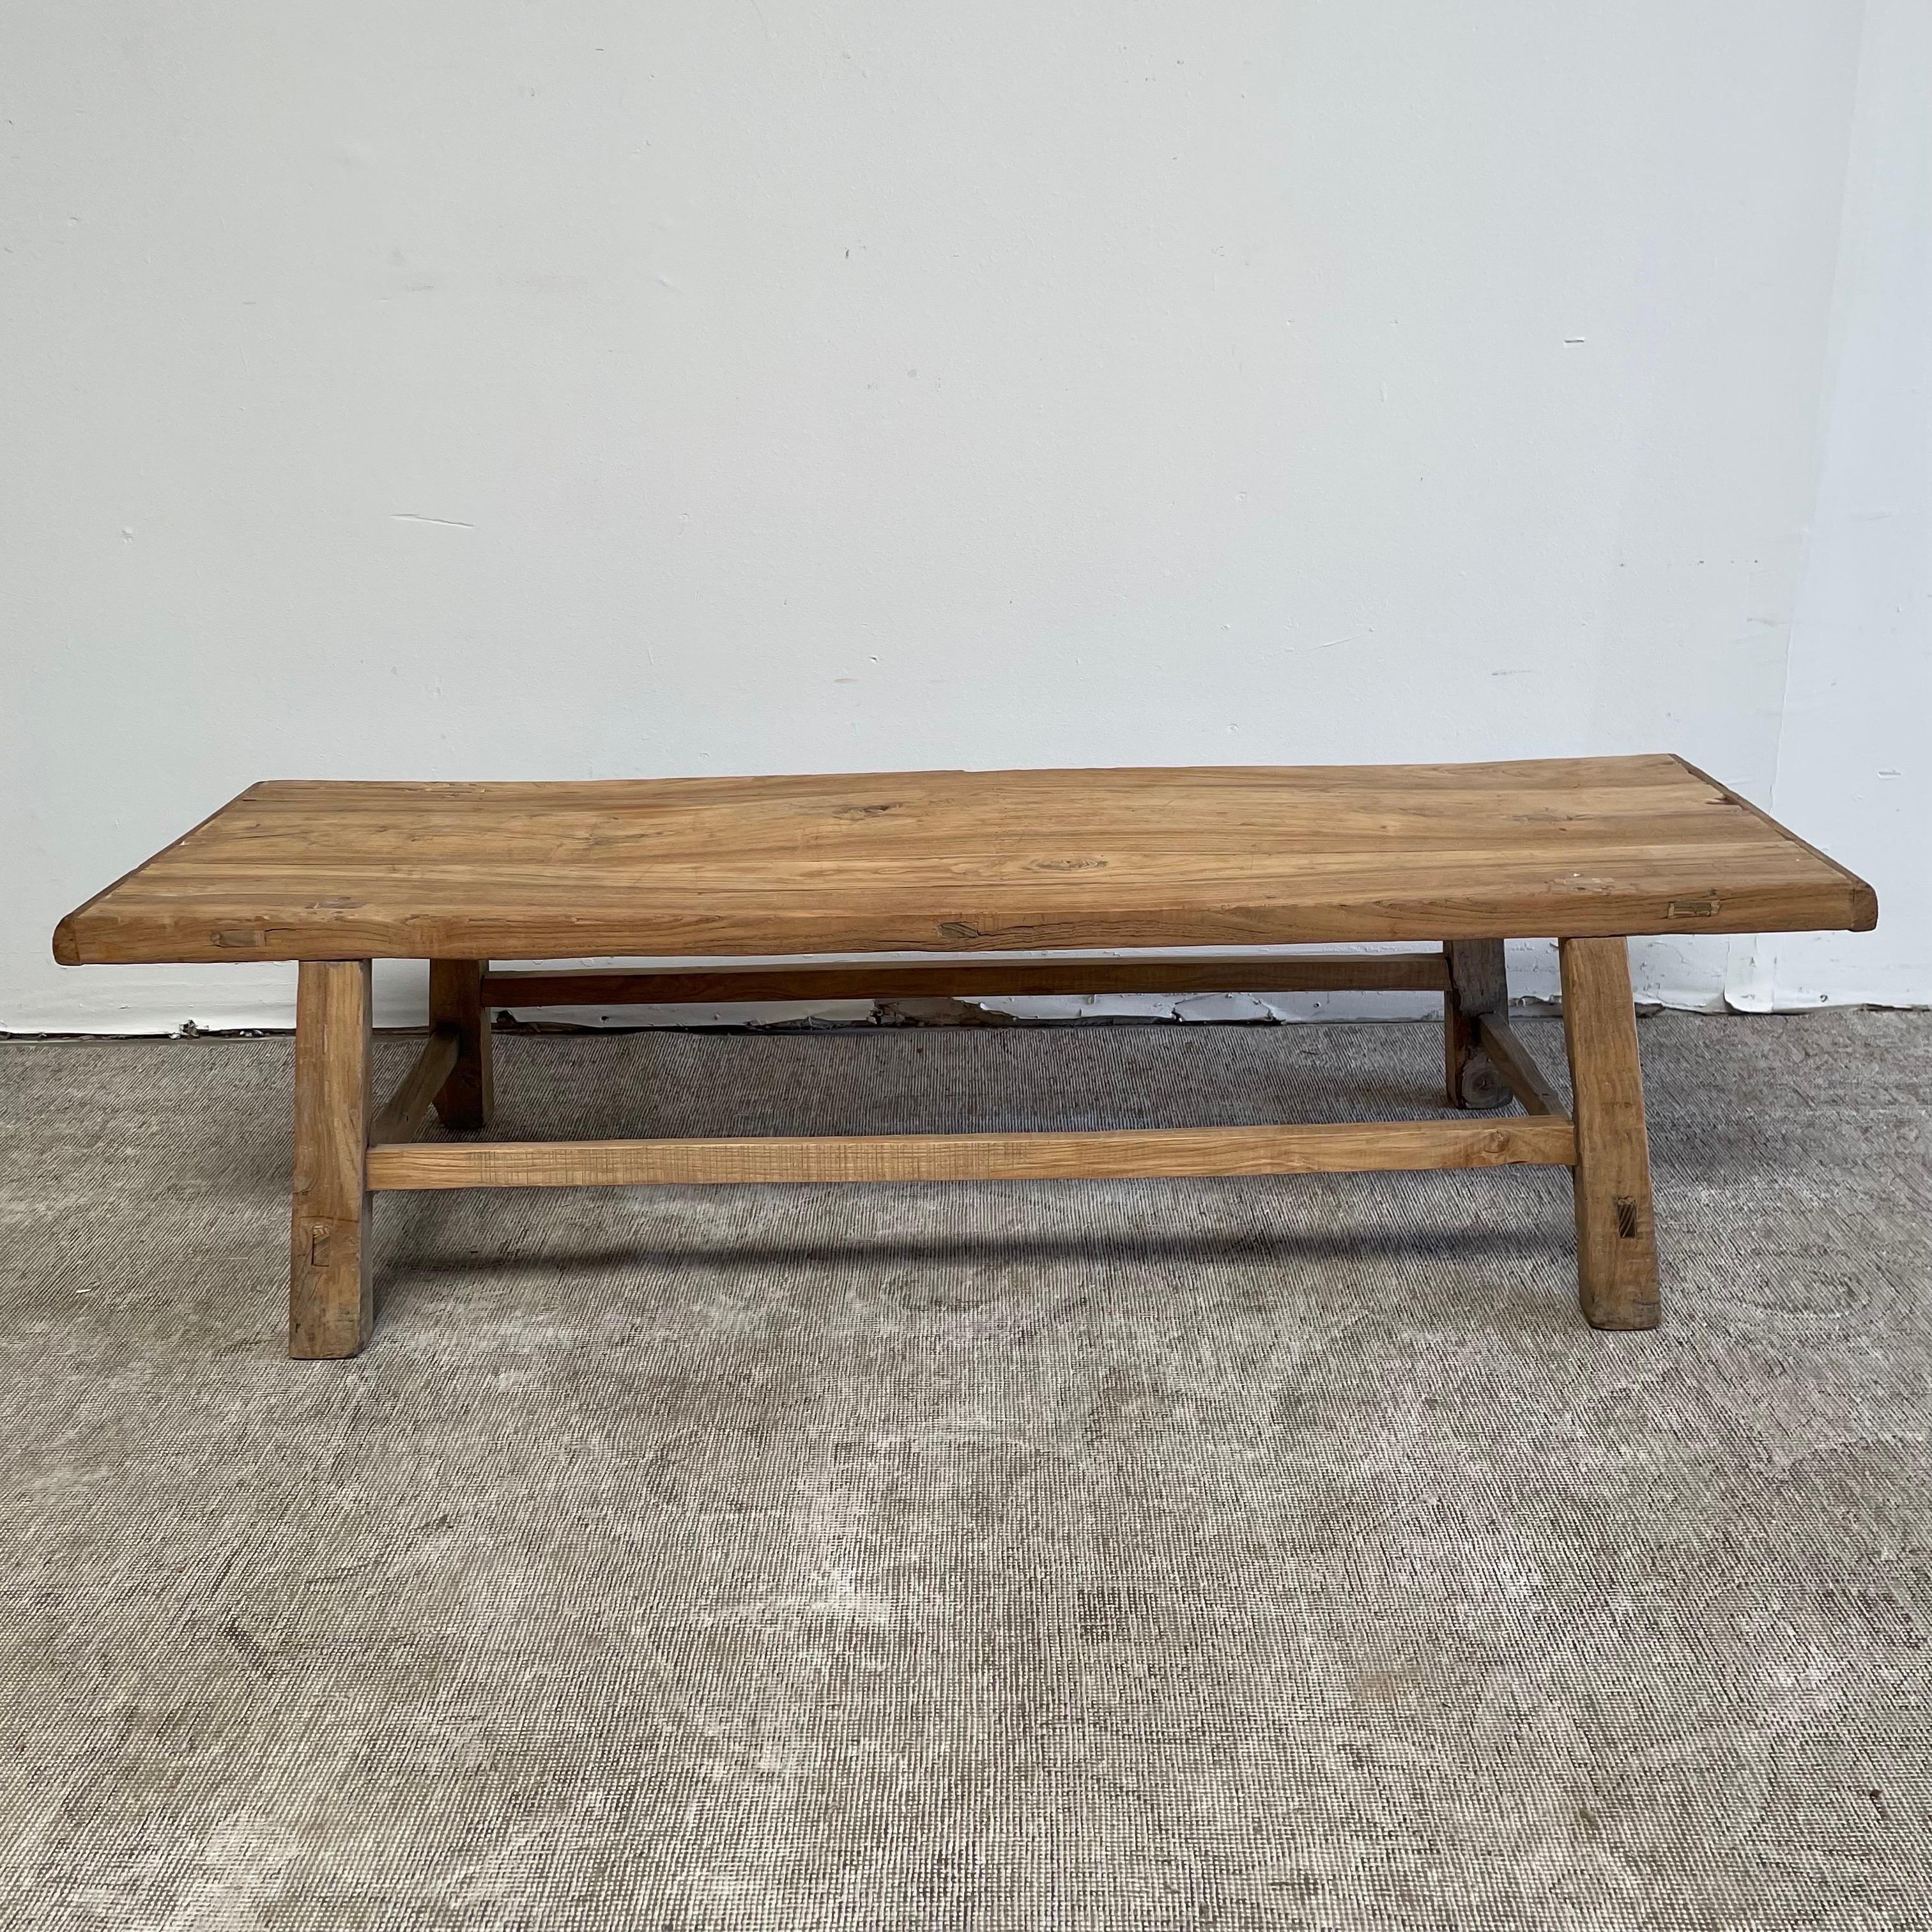 Vintage Elm Wood Coffee Table or Wide Seat Bench 6